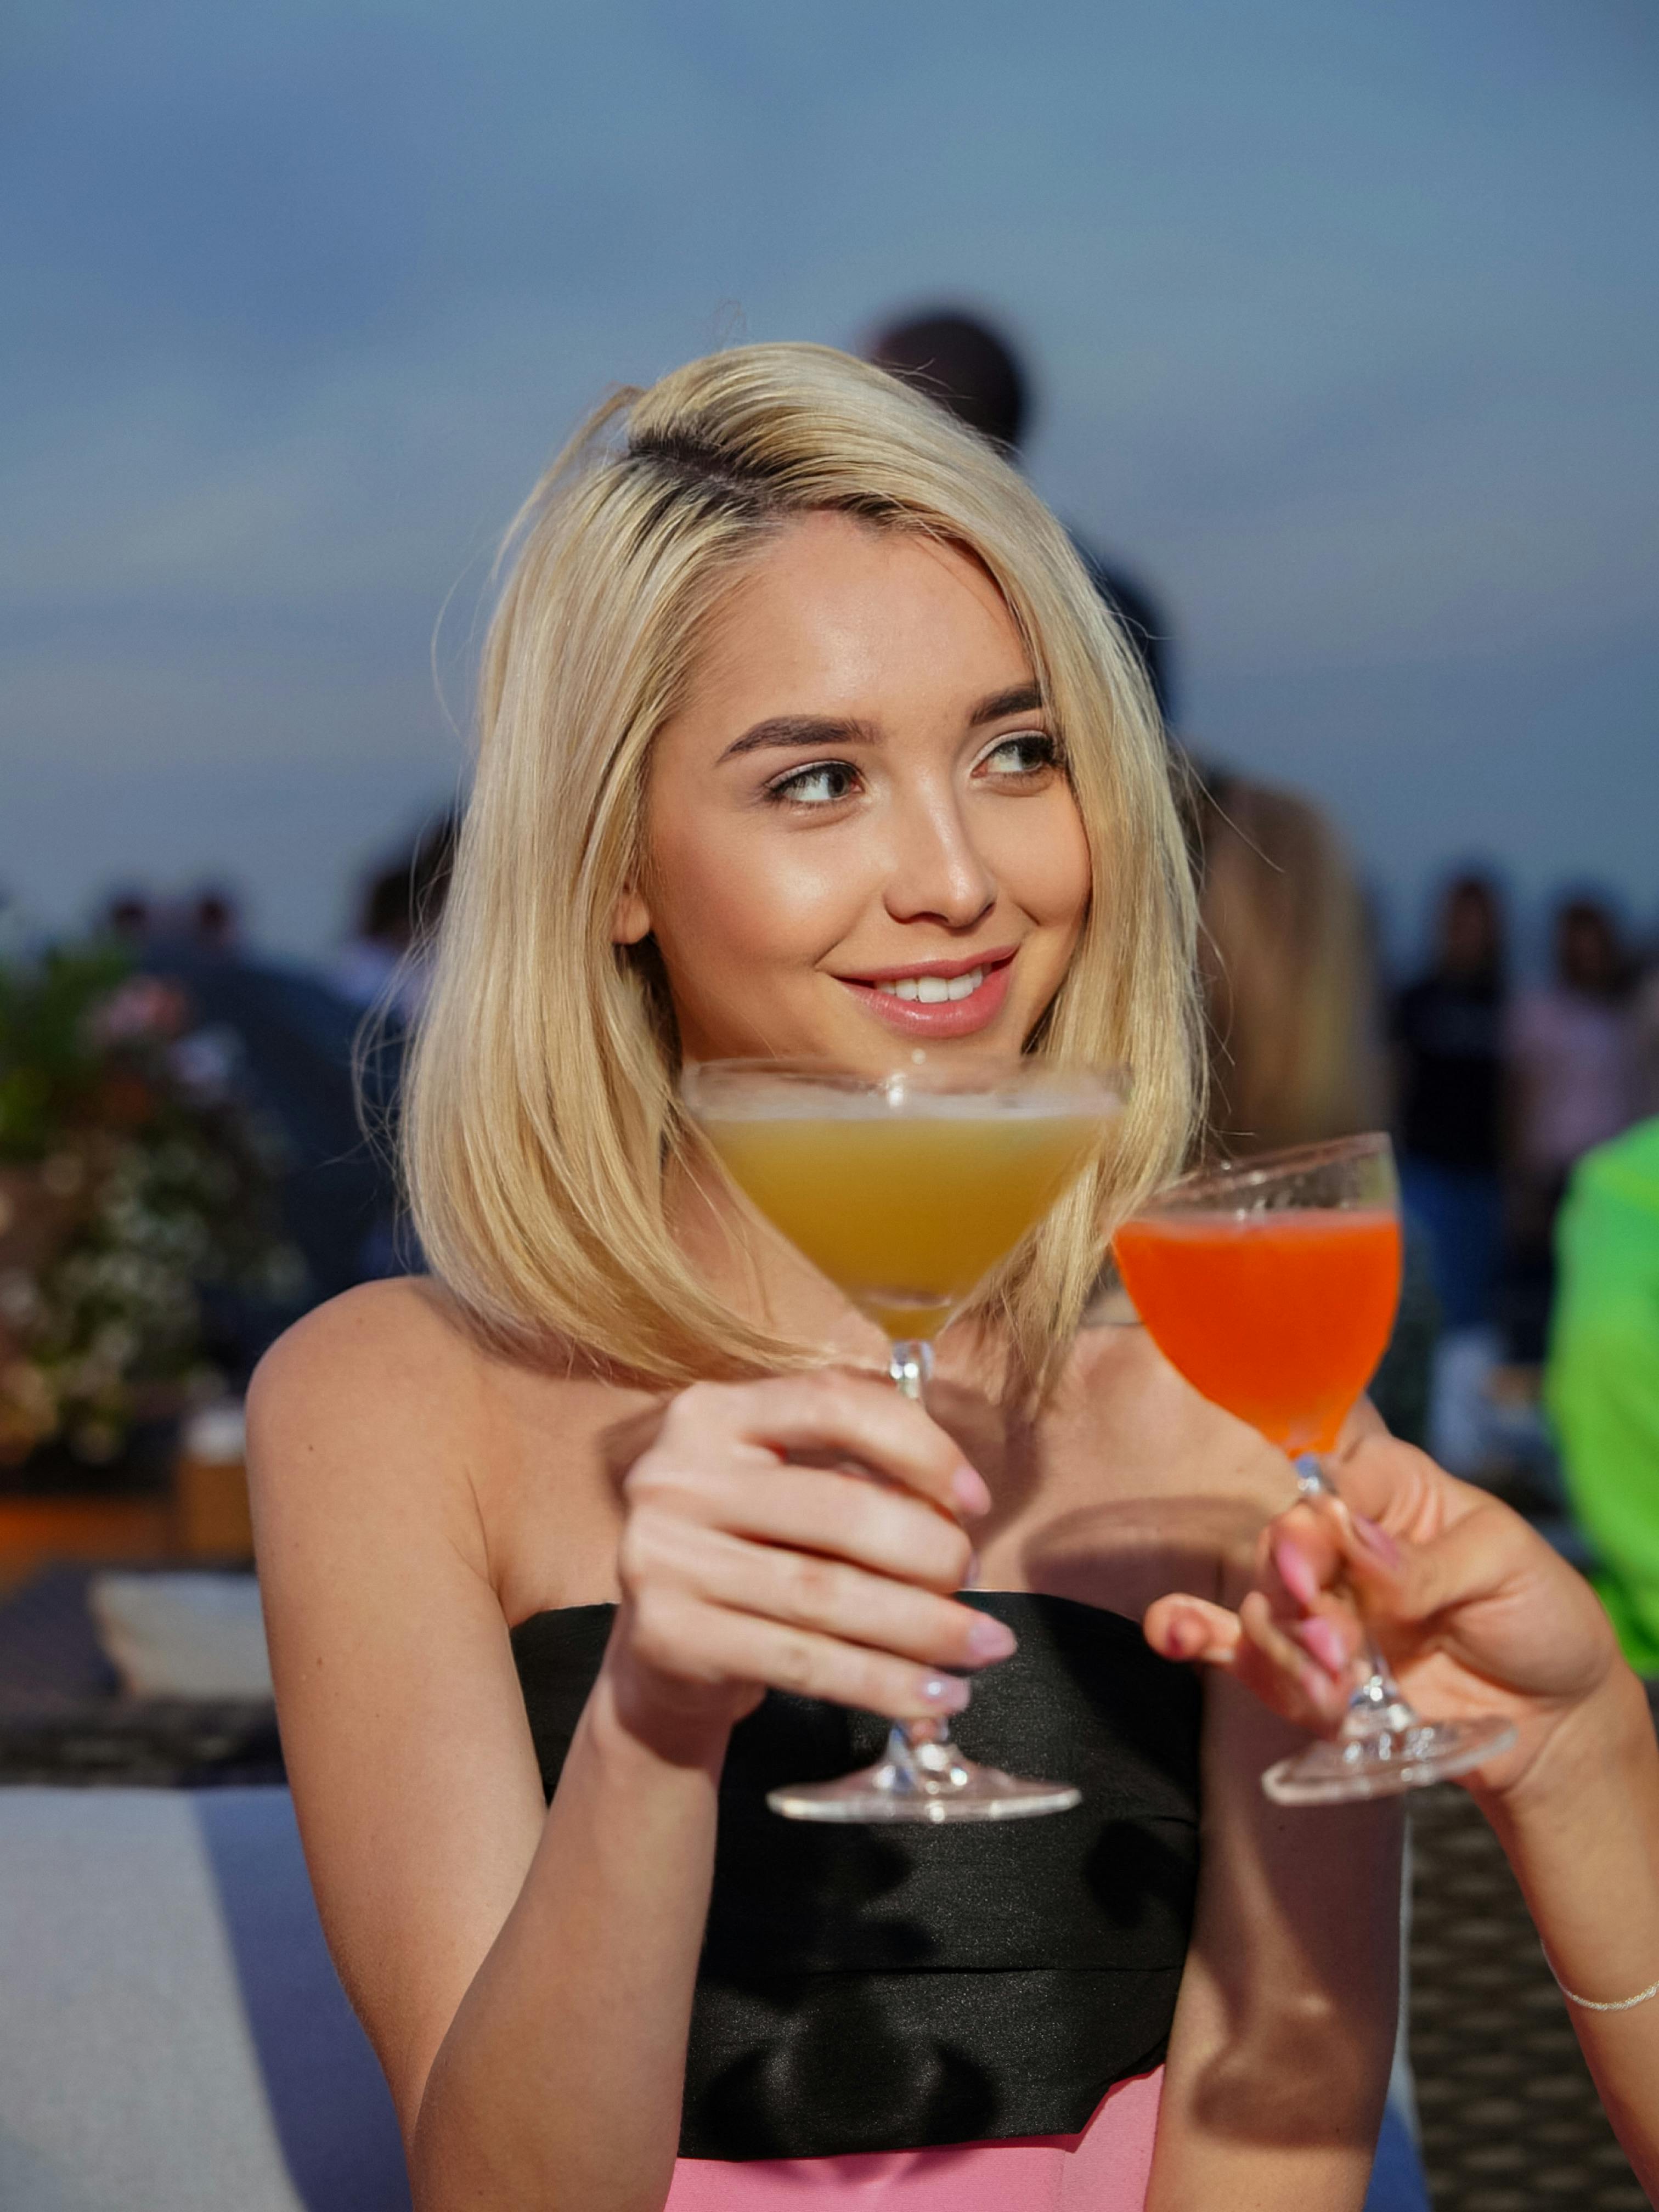 Blonde with Cocktail during Toast | Source: Pexels